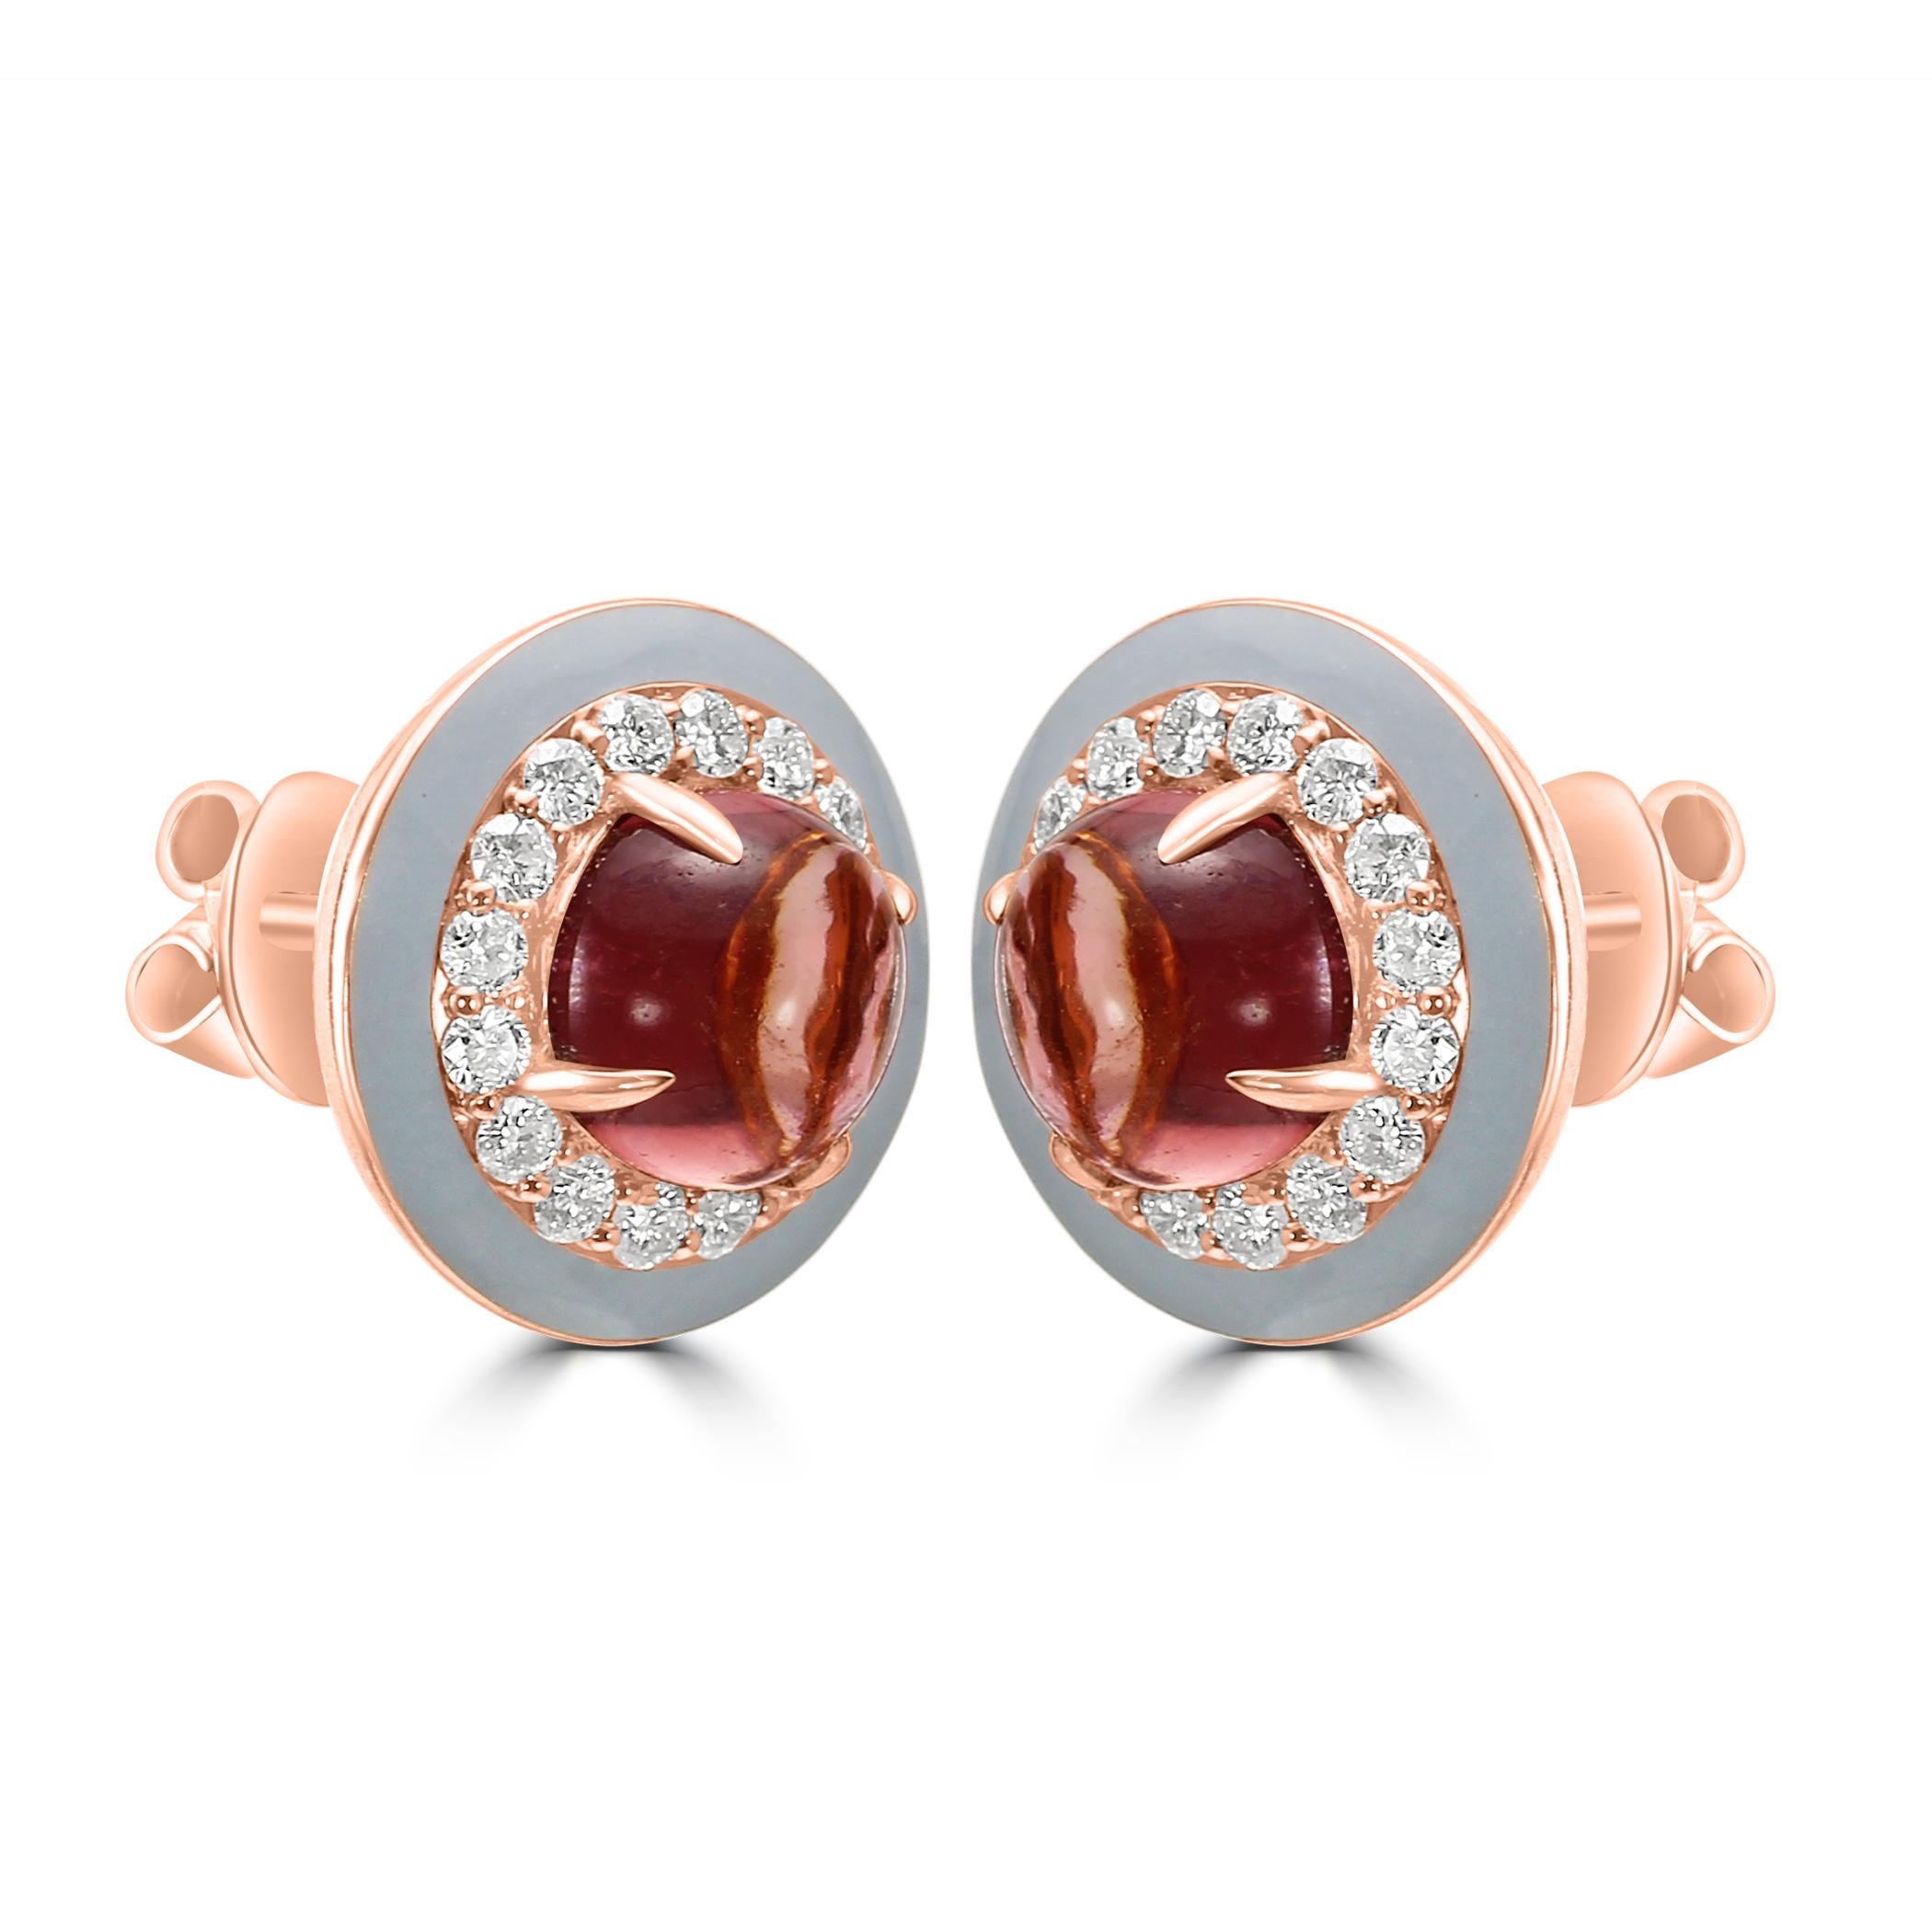 Step into the glamorous world of Art Deco with our Fashion Stud Art-Deco Earrings, a stunning blend of vintage-inspired design and modern beauty. 

These earrings are adorned with a mesmerizing Pinkish Red Tourmaline at the center, showcasing a